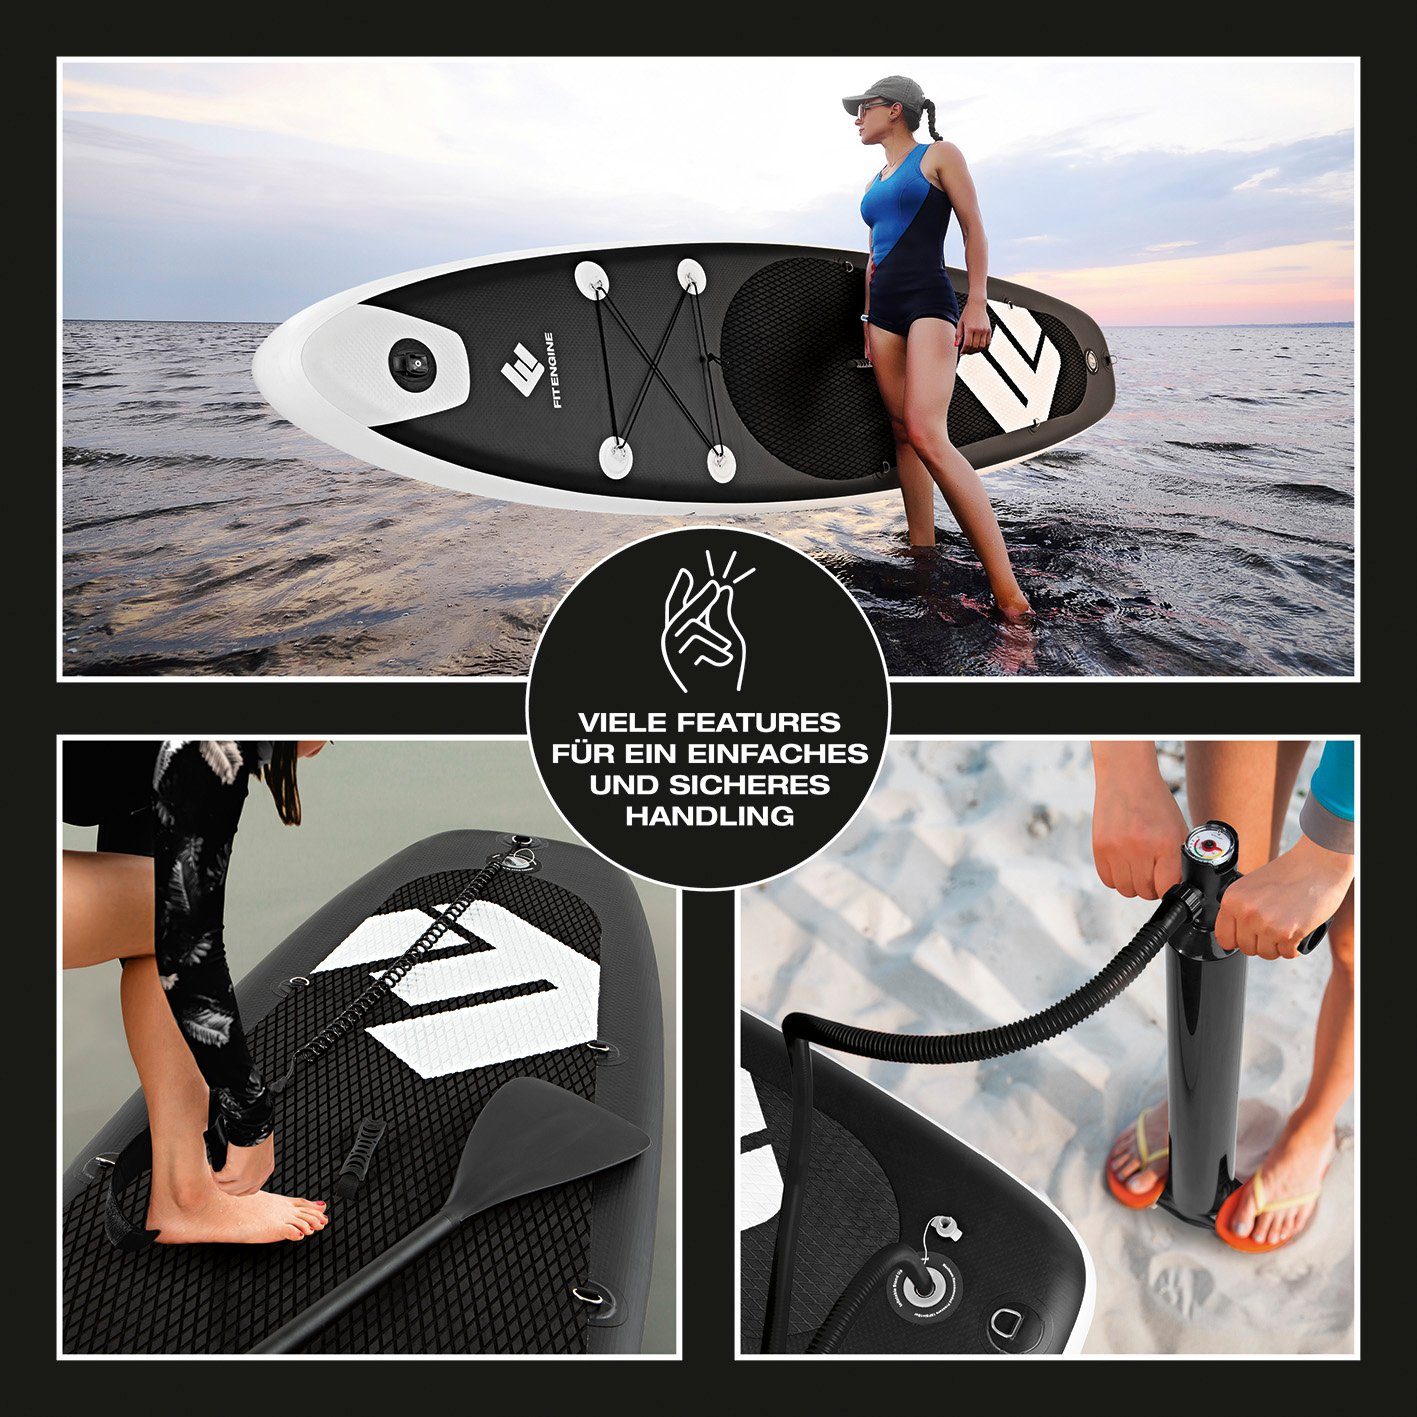 FitEngine Inflatable SUP-Board Stand Up extra aufblasbar 365cm 160kg Paddle, Groß stabil